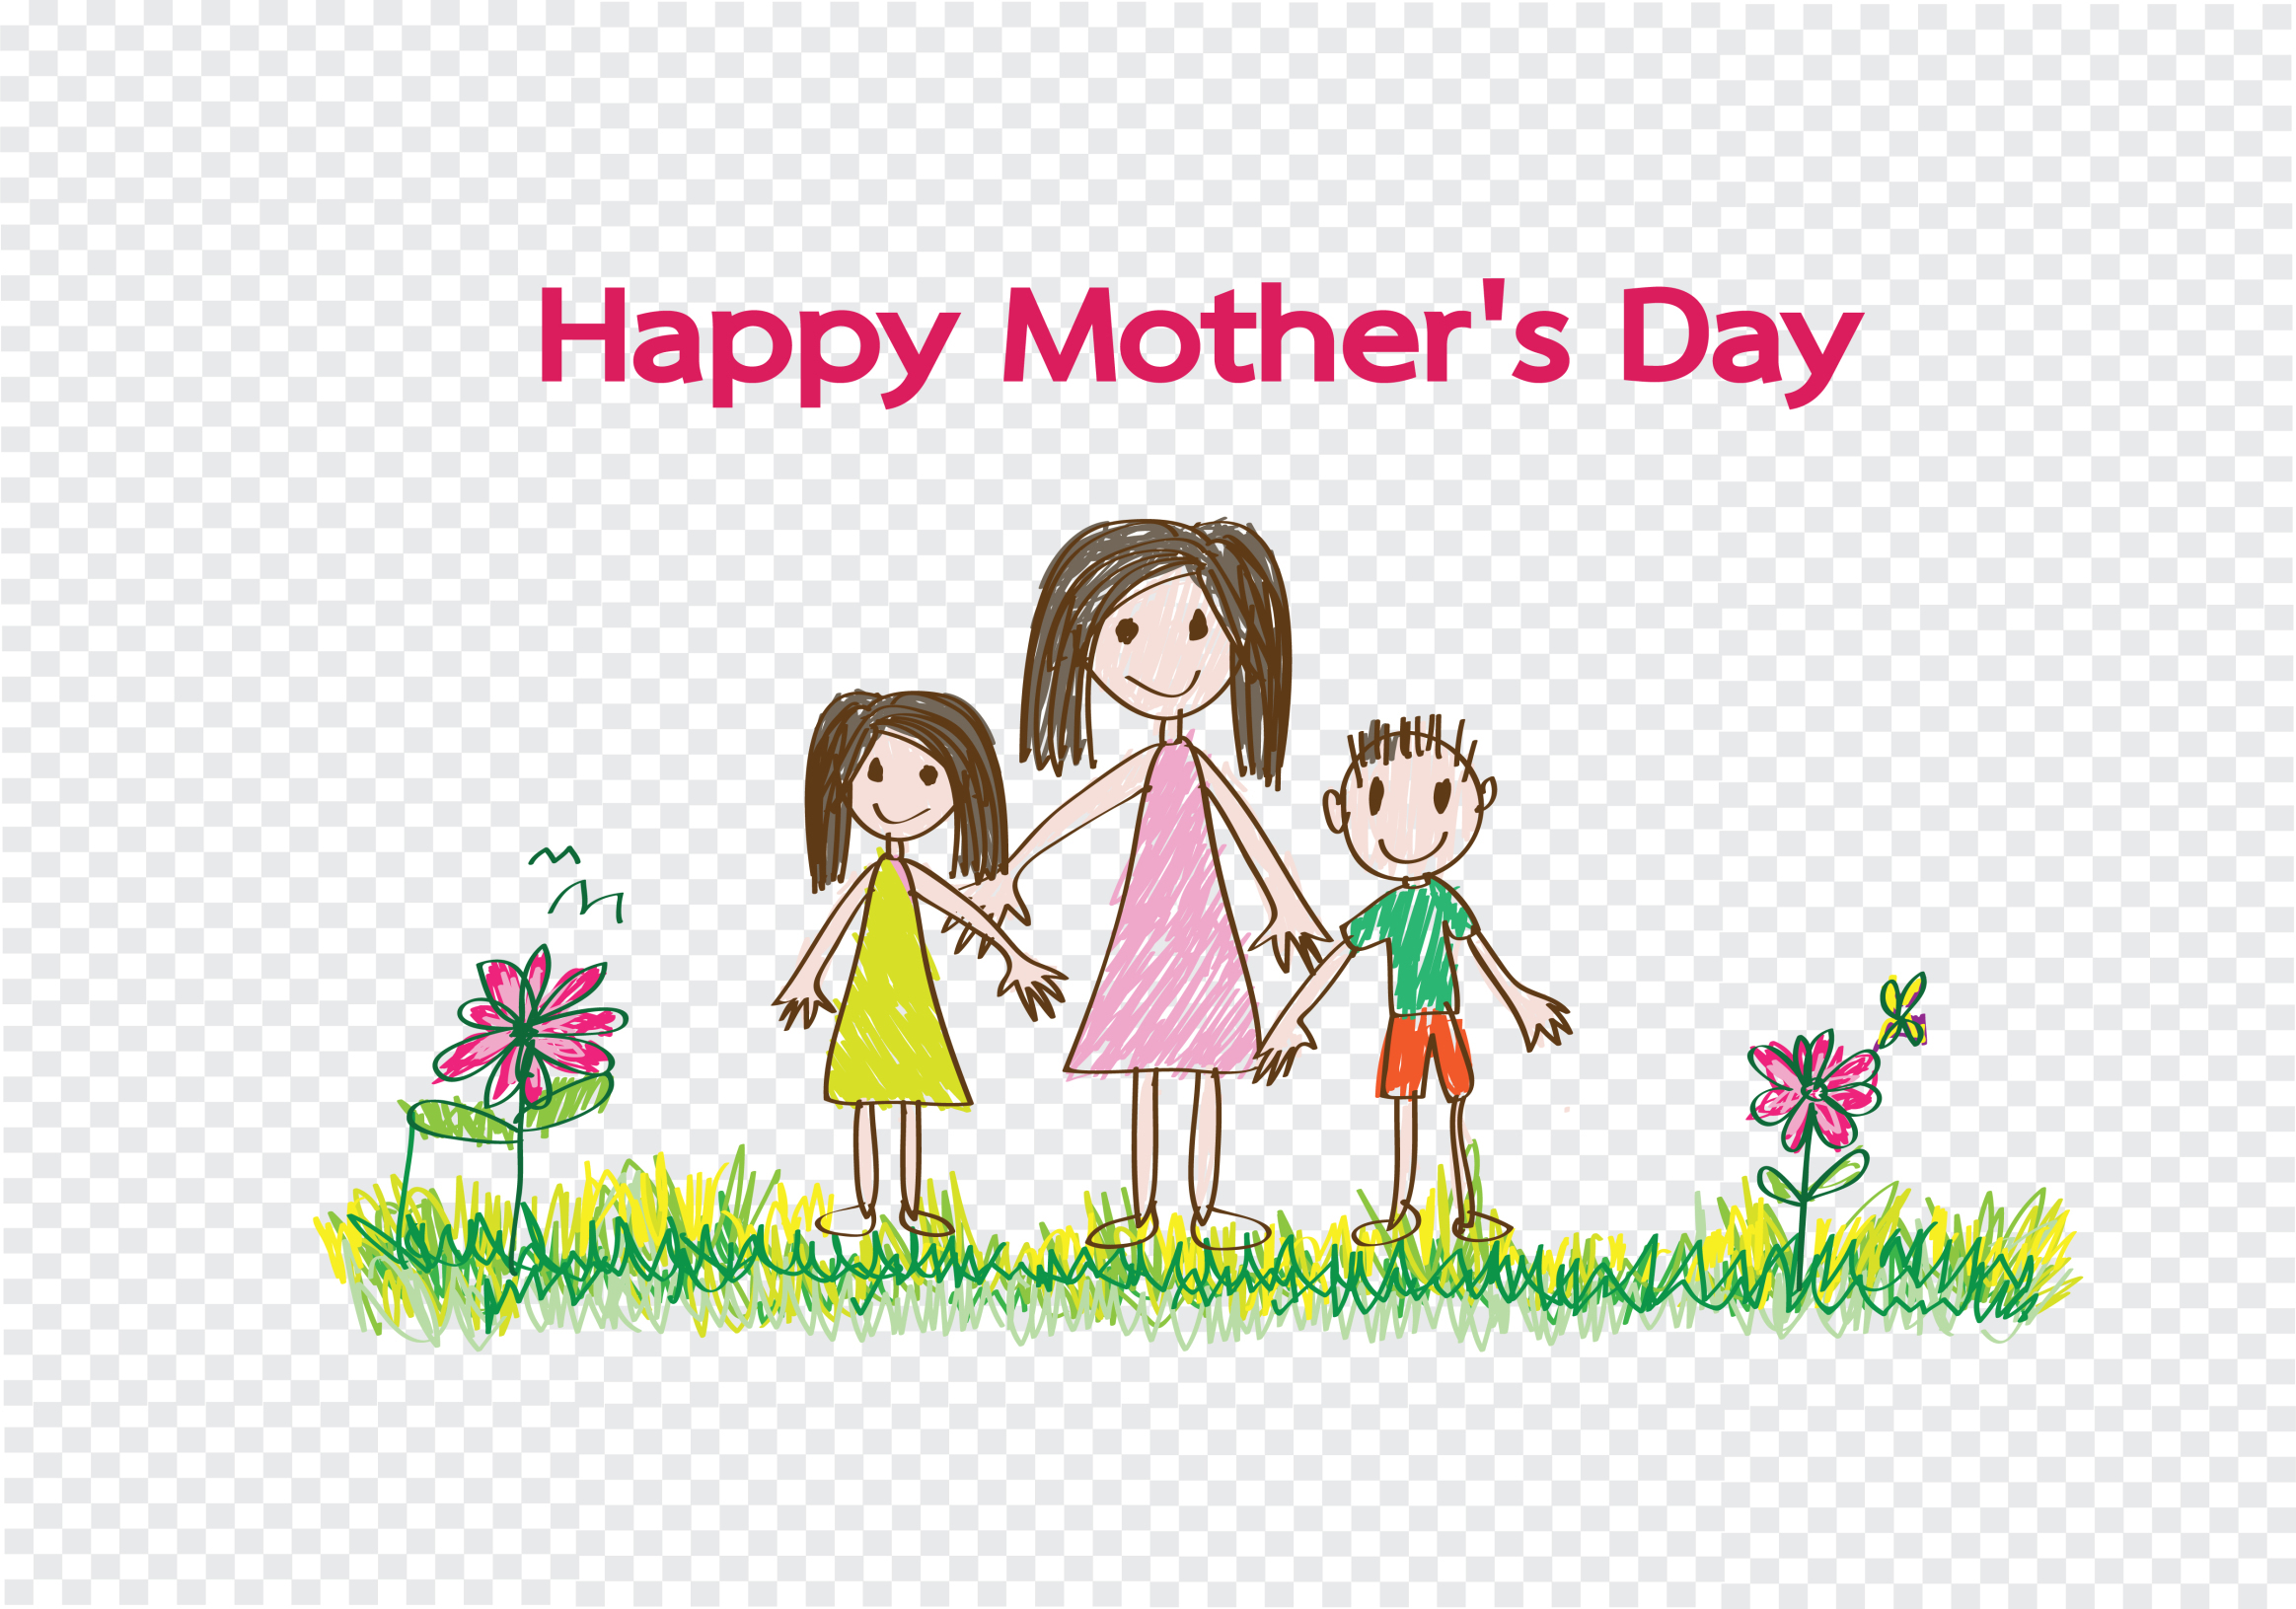 Happy Mothers Day Card With Family Cartoons